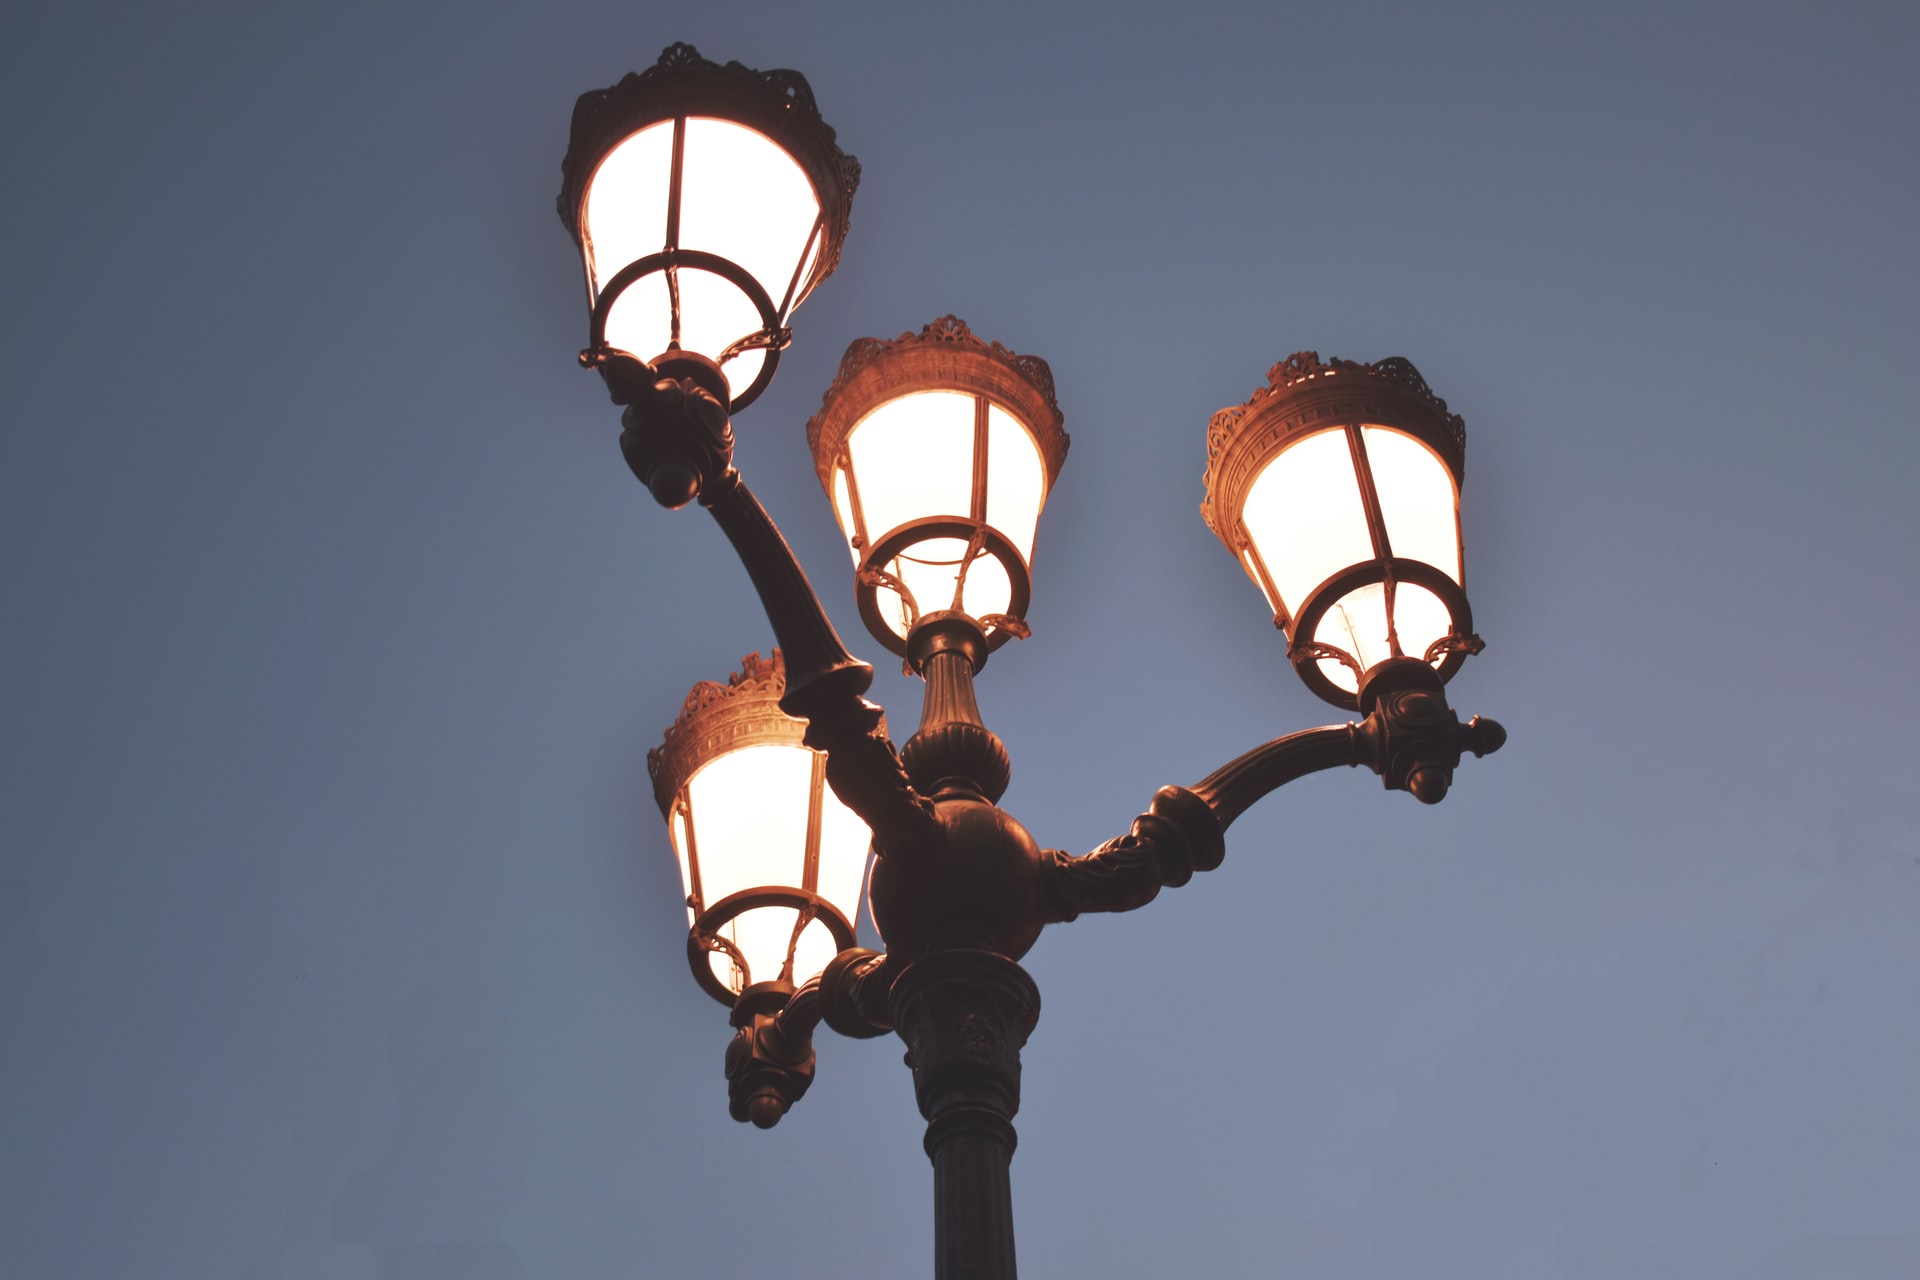 Smart street lighting - Harnessing the pole position